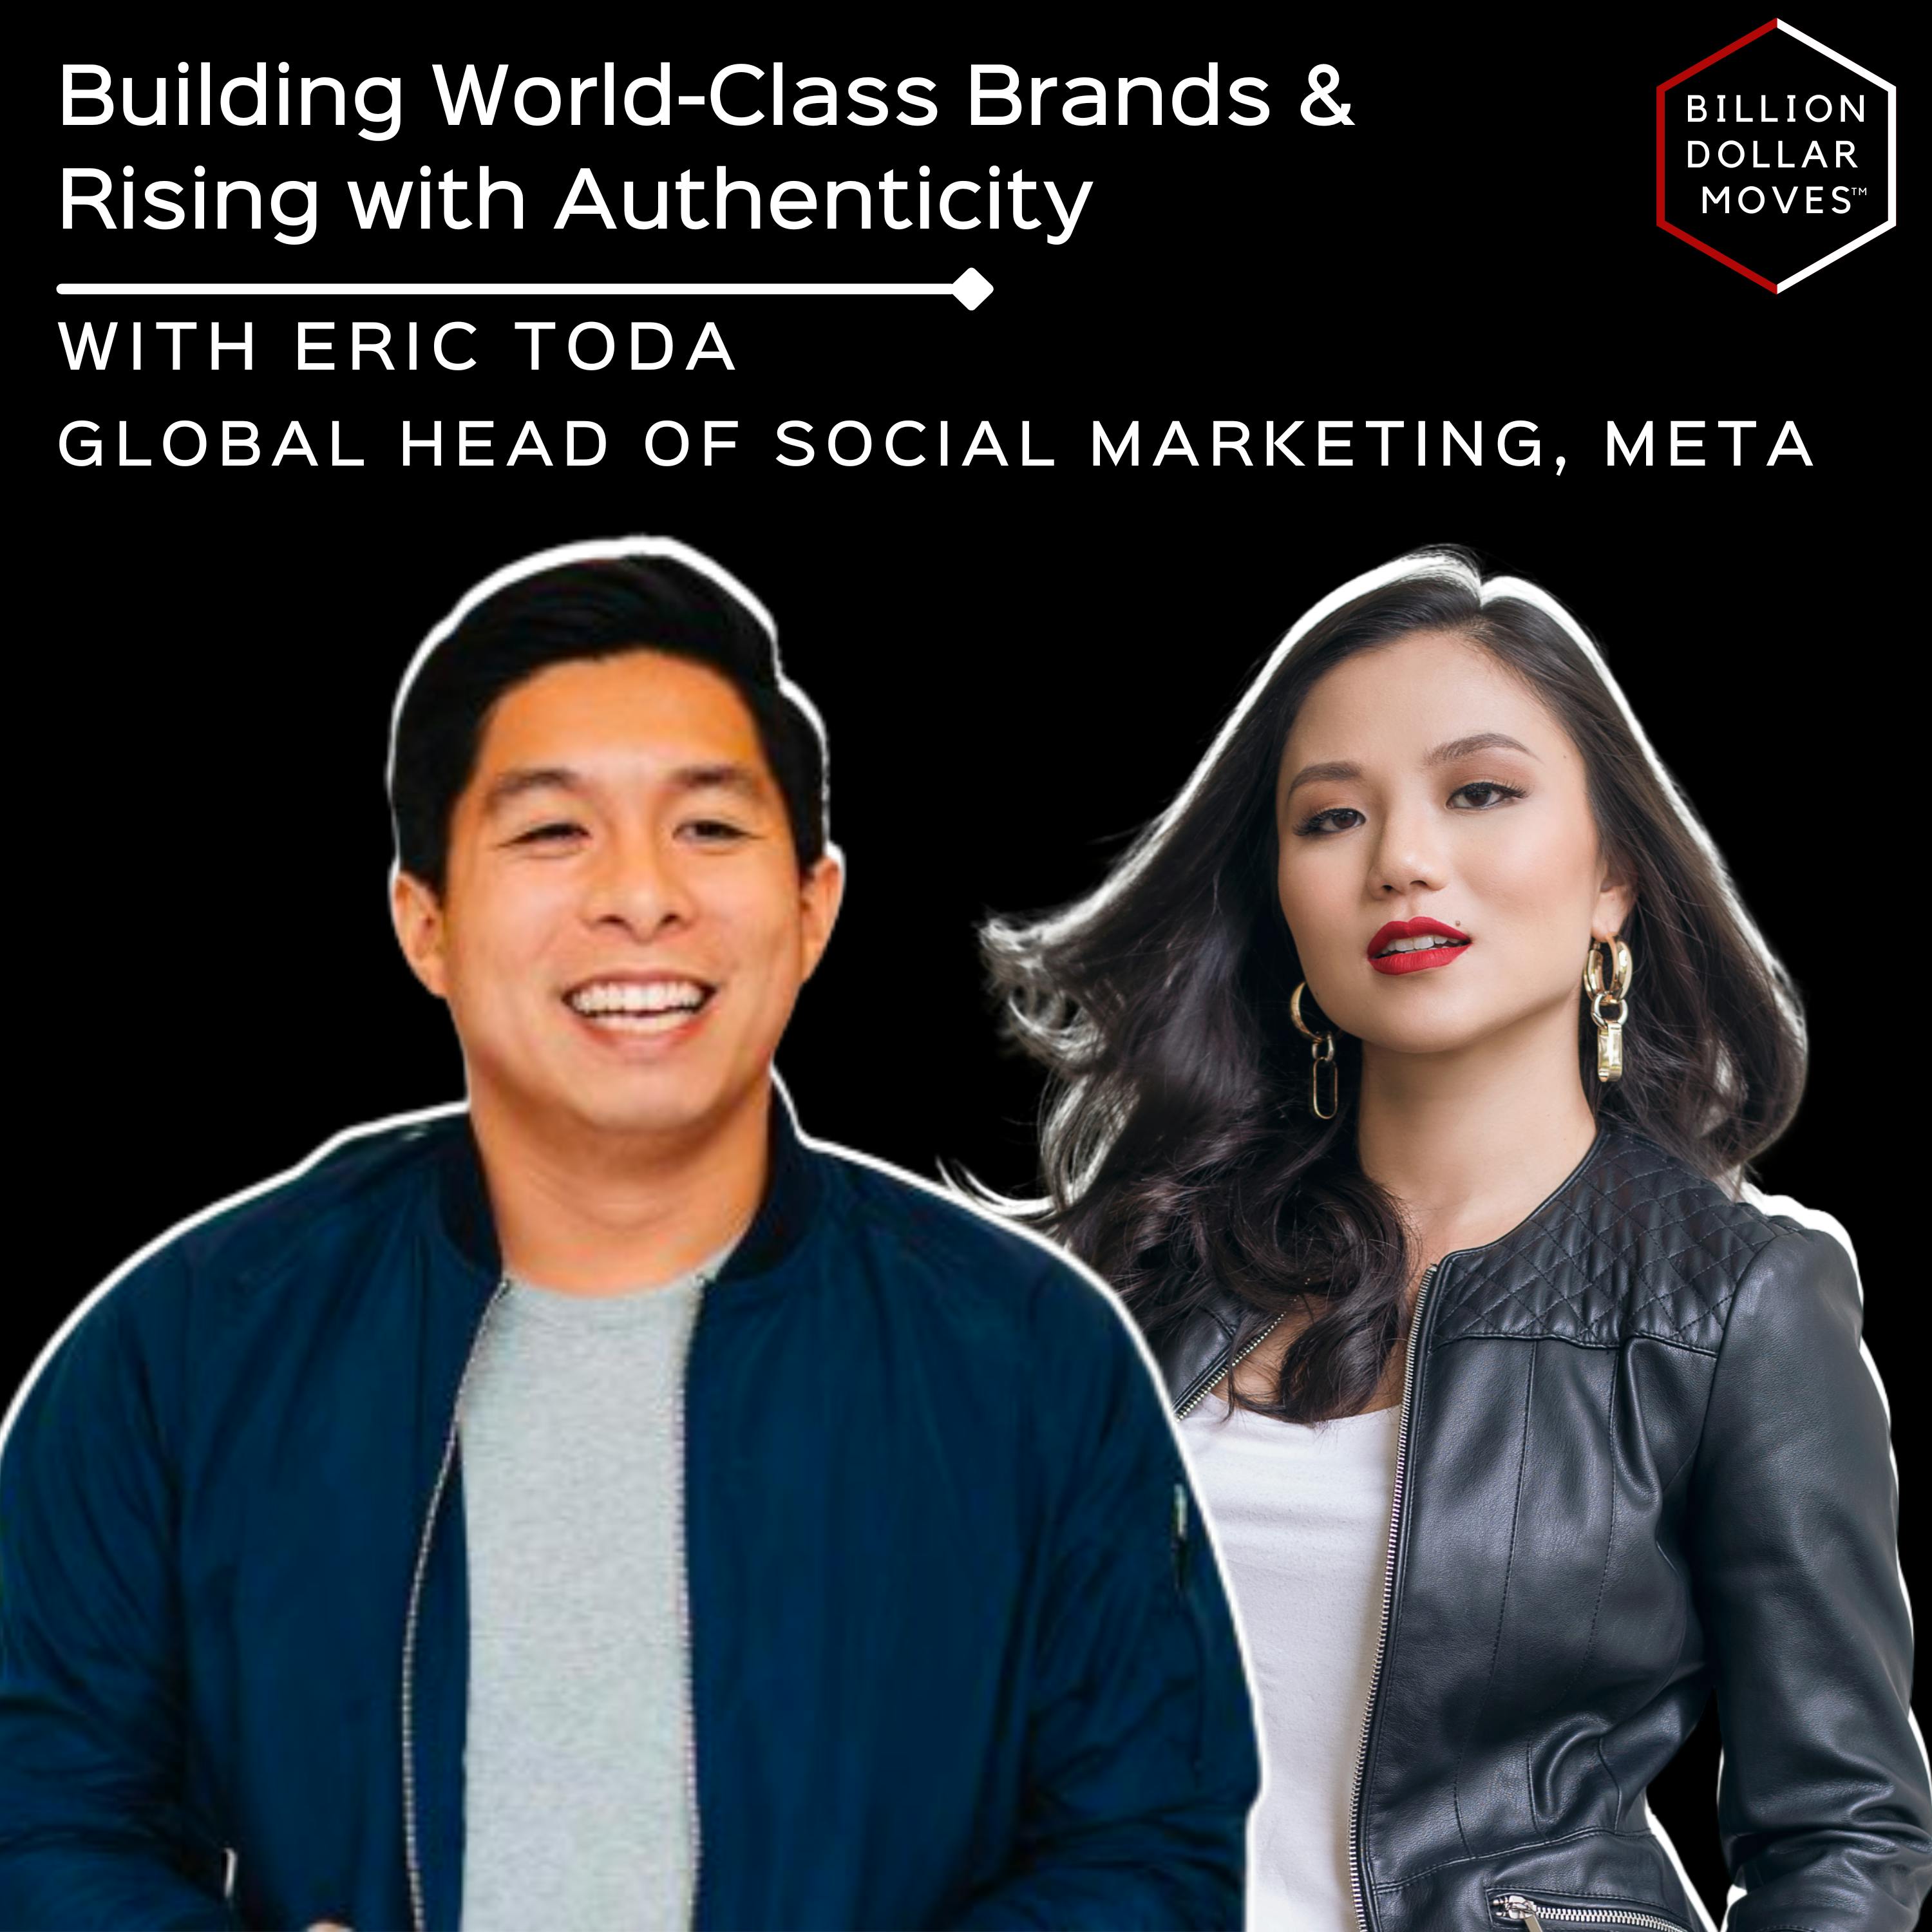 Meta's Global Head of Social Marketing, Eric Toda on Building World-Class Brands & Rising with Authenticity